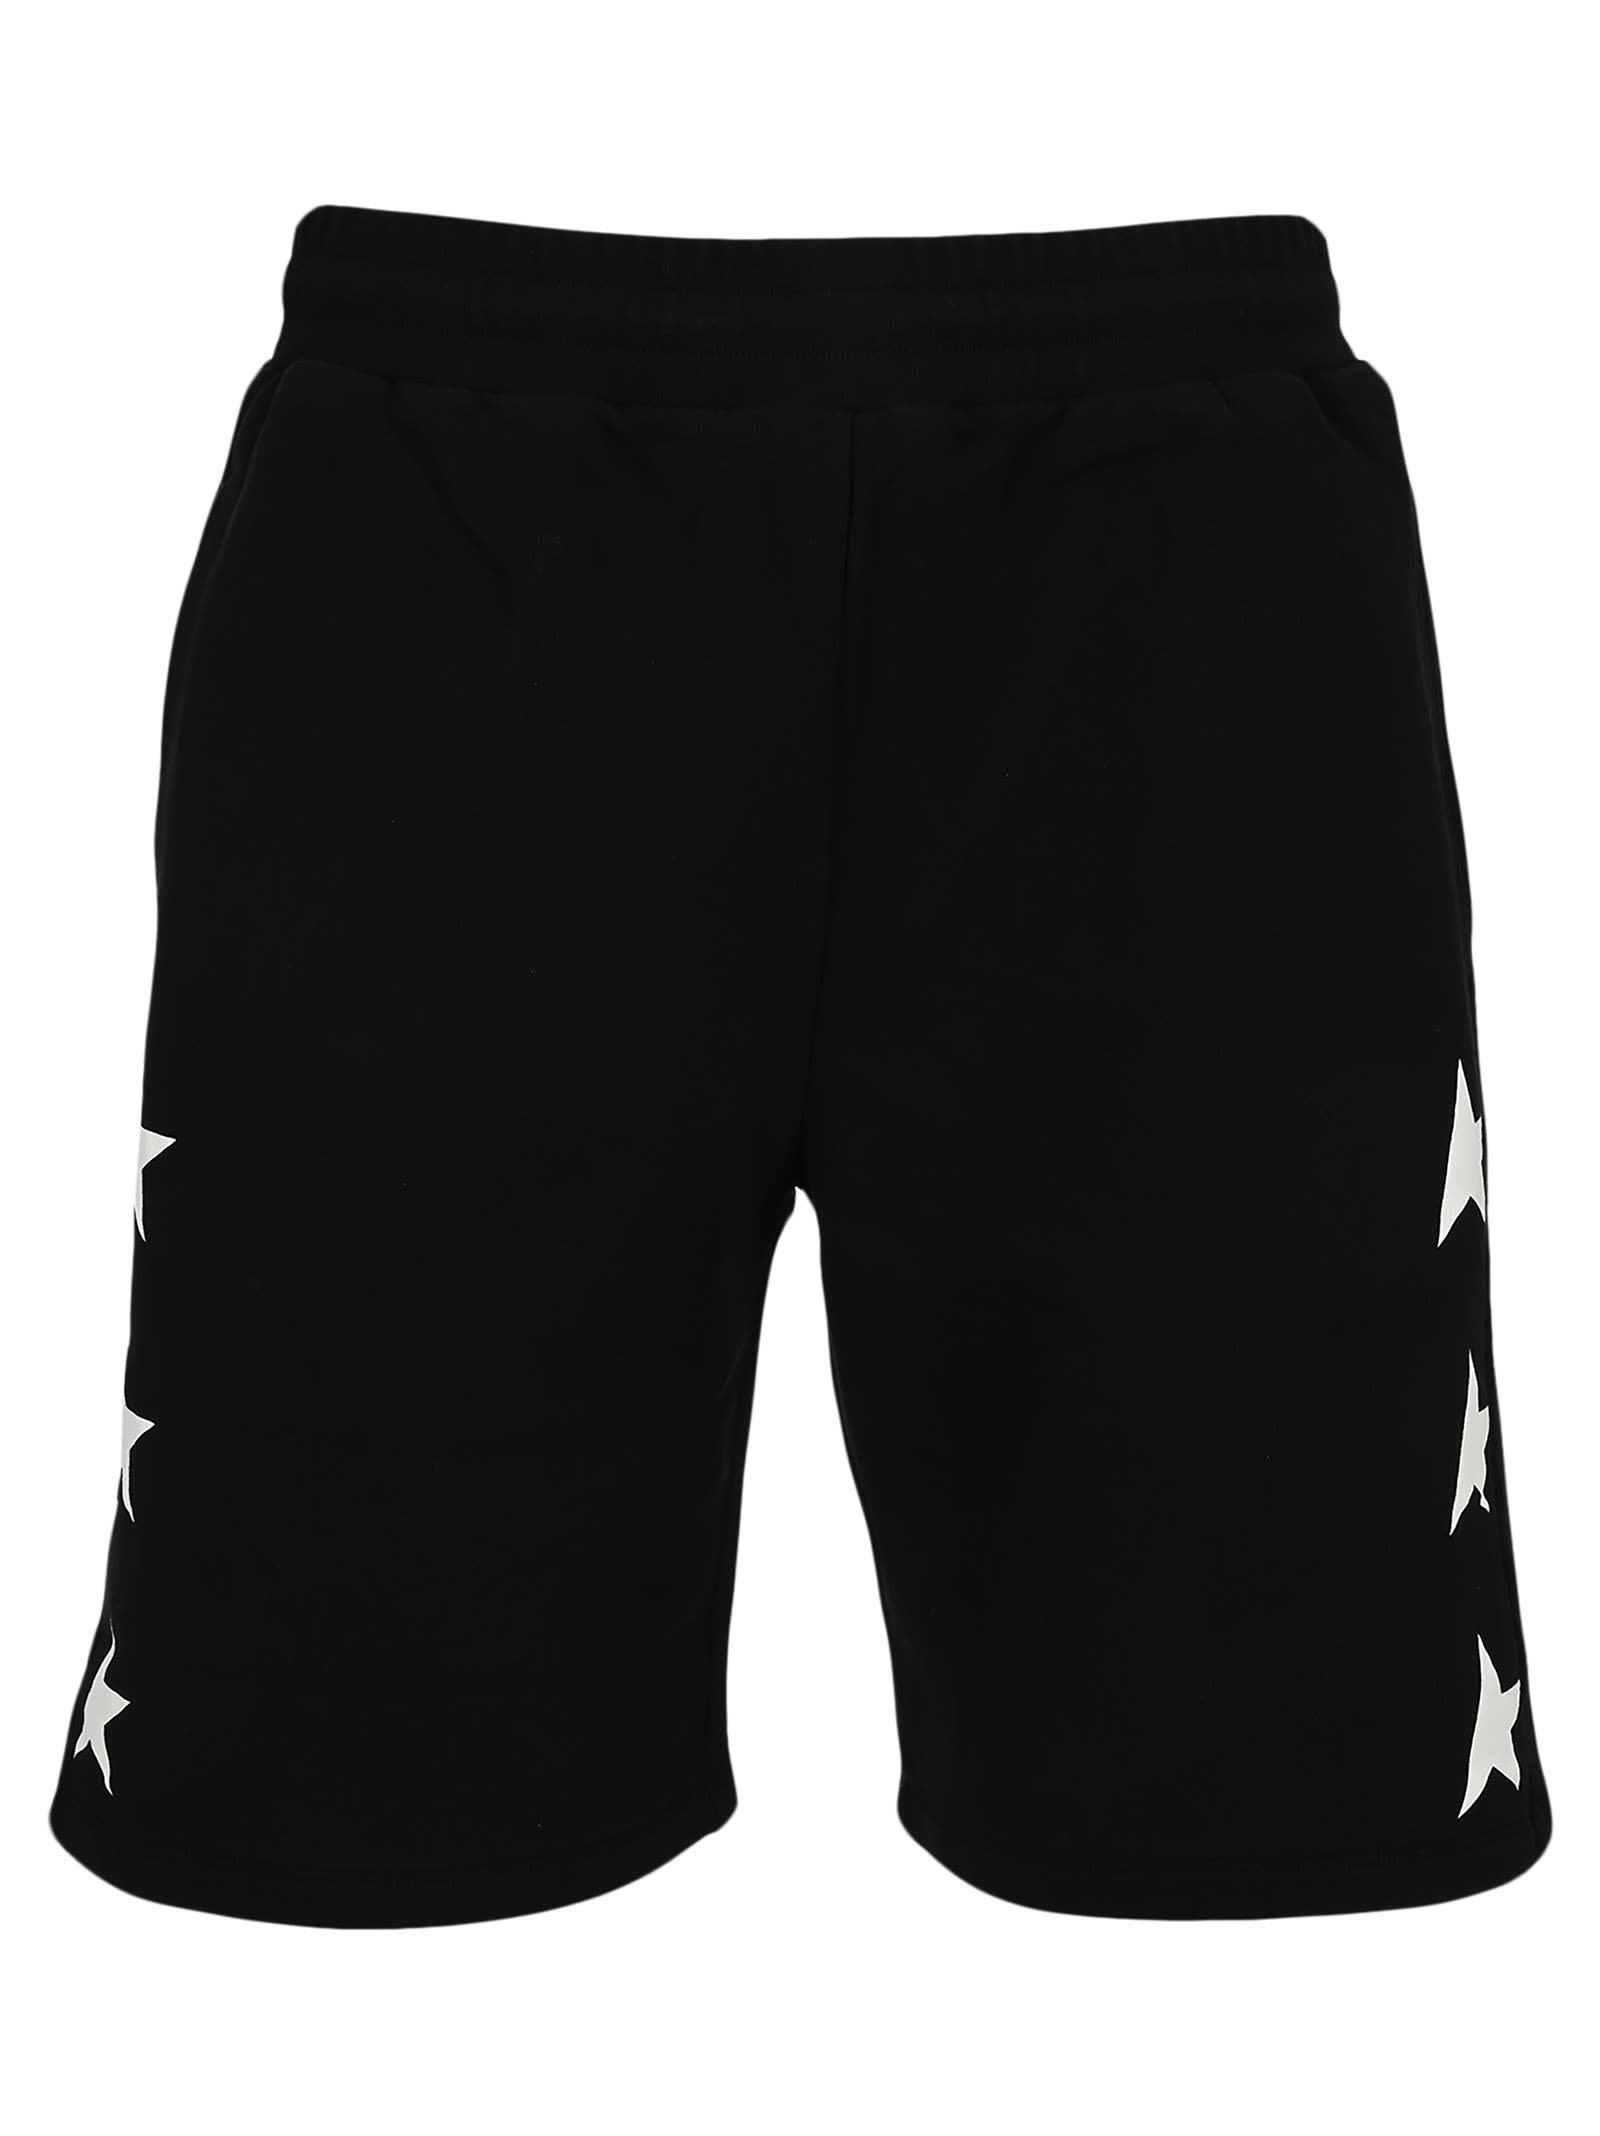 Golden Goose Black Diego Star Collection Bermuda Shorts With Contrasting White Stars